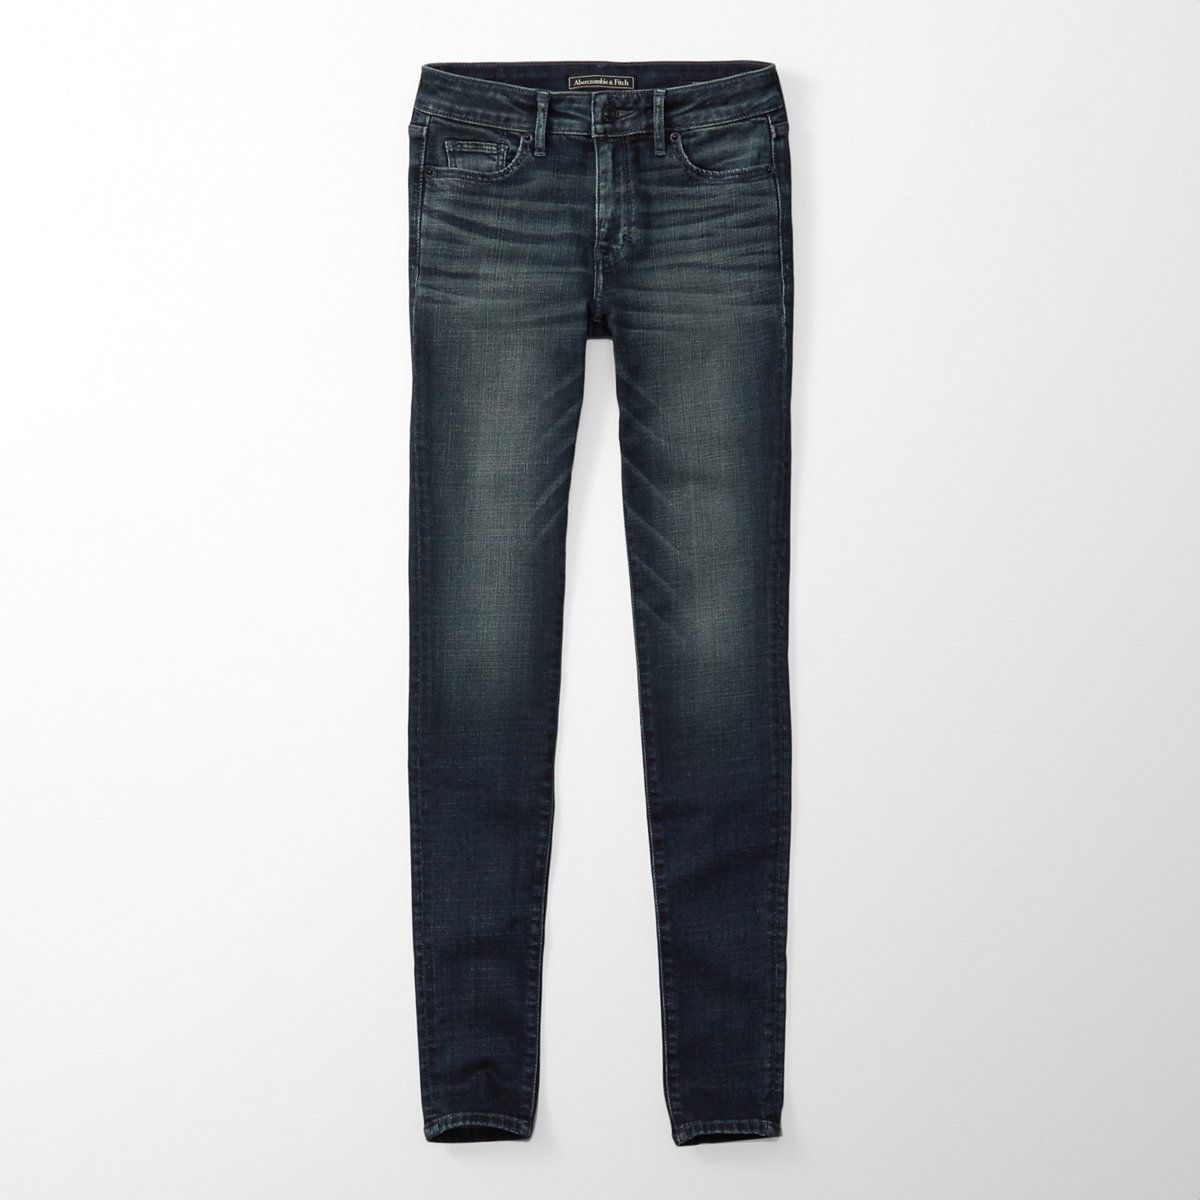 Super Skinny Jeans | Abercrombie & Fitch US & UK